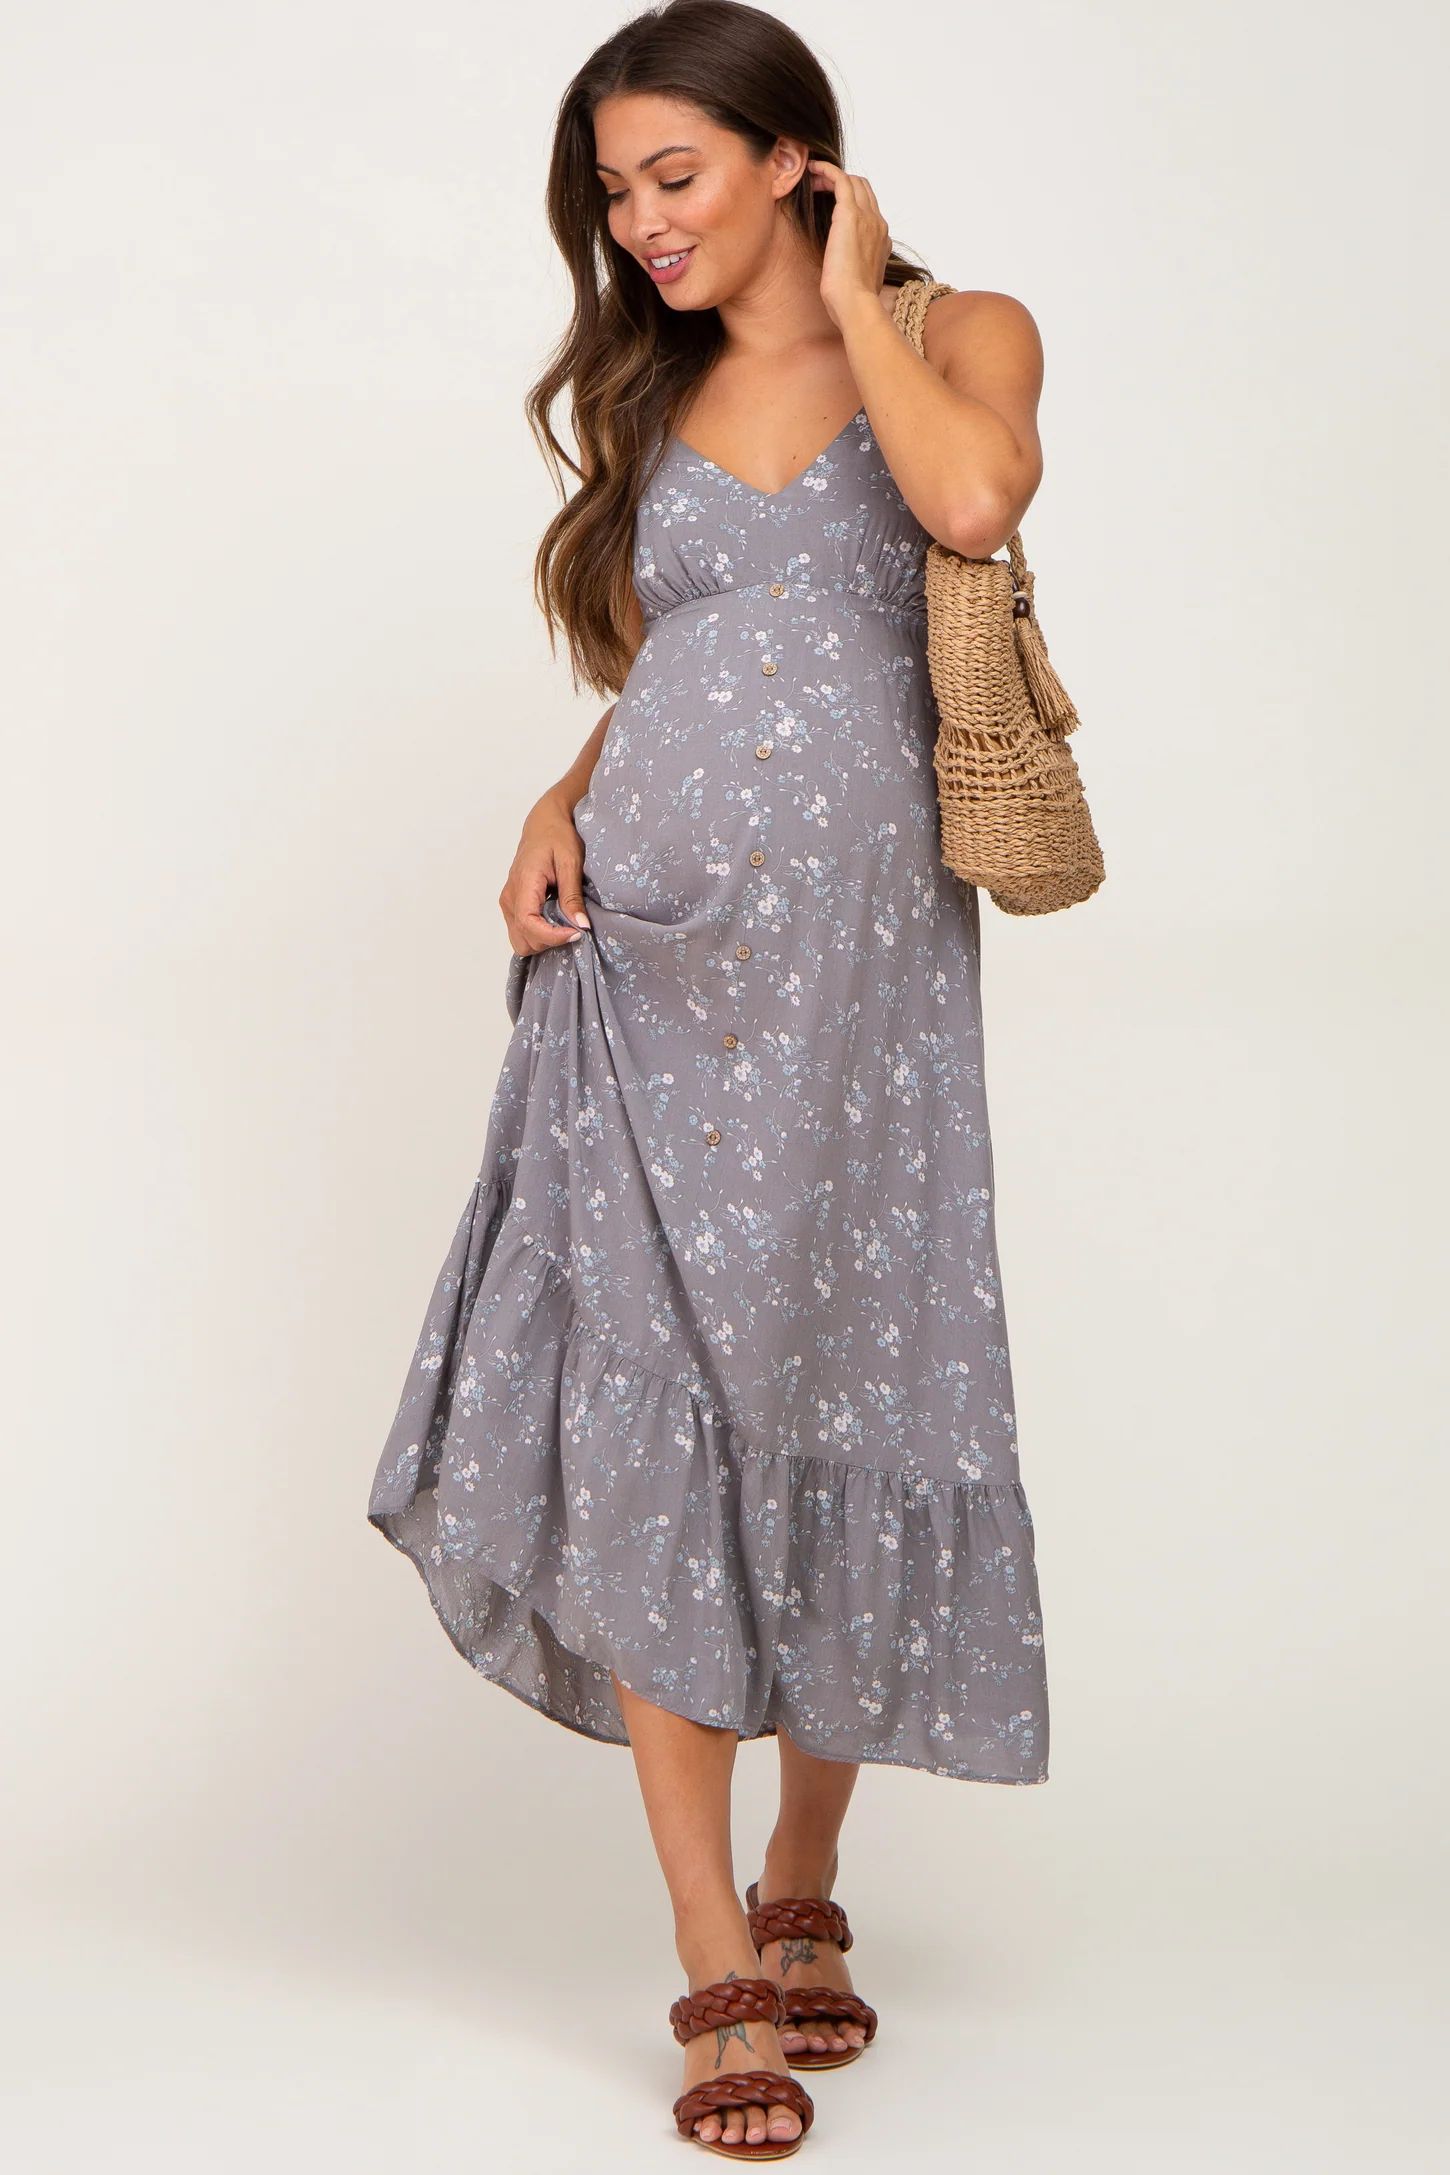 Grey Floral Sleeveless Button Front Maternity Dress | PinkBlush Maternity